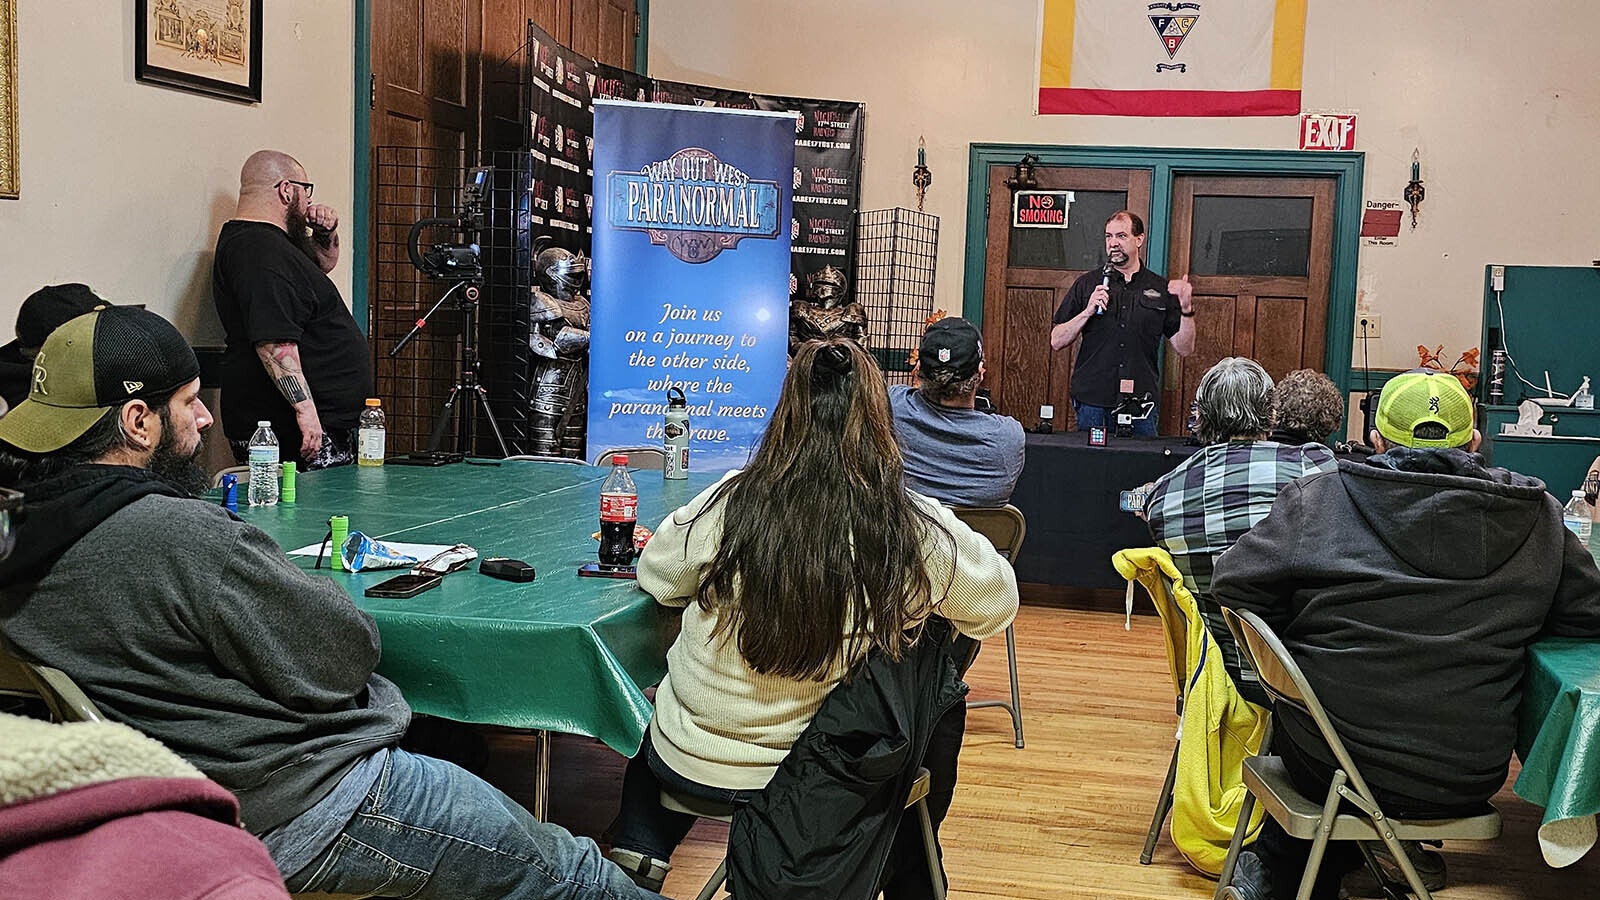 Way Out West Paranormal's Arron Black Burn talks about the equipment that would be used during a recent paranormal investigation at the Knights of Pythias in Cheyenne.